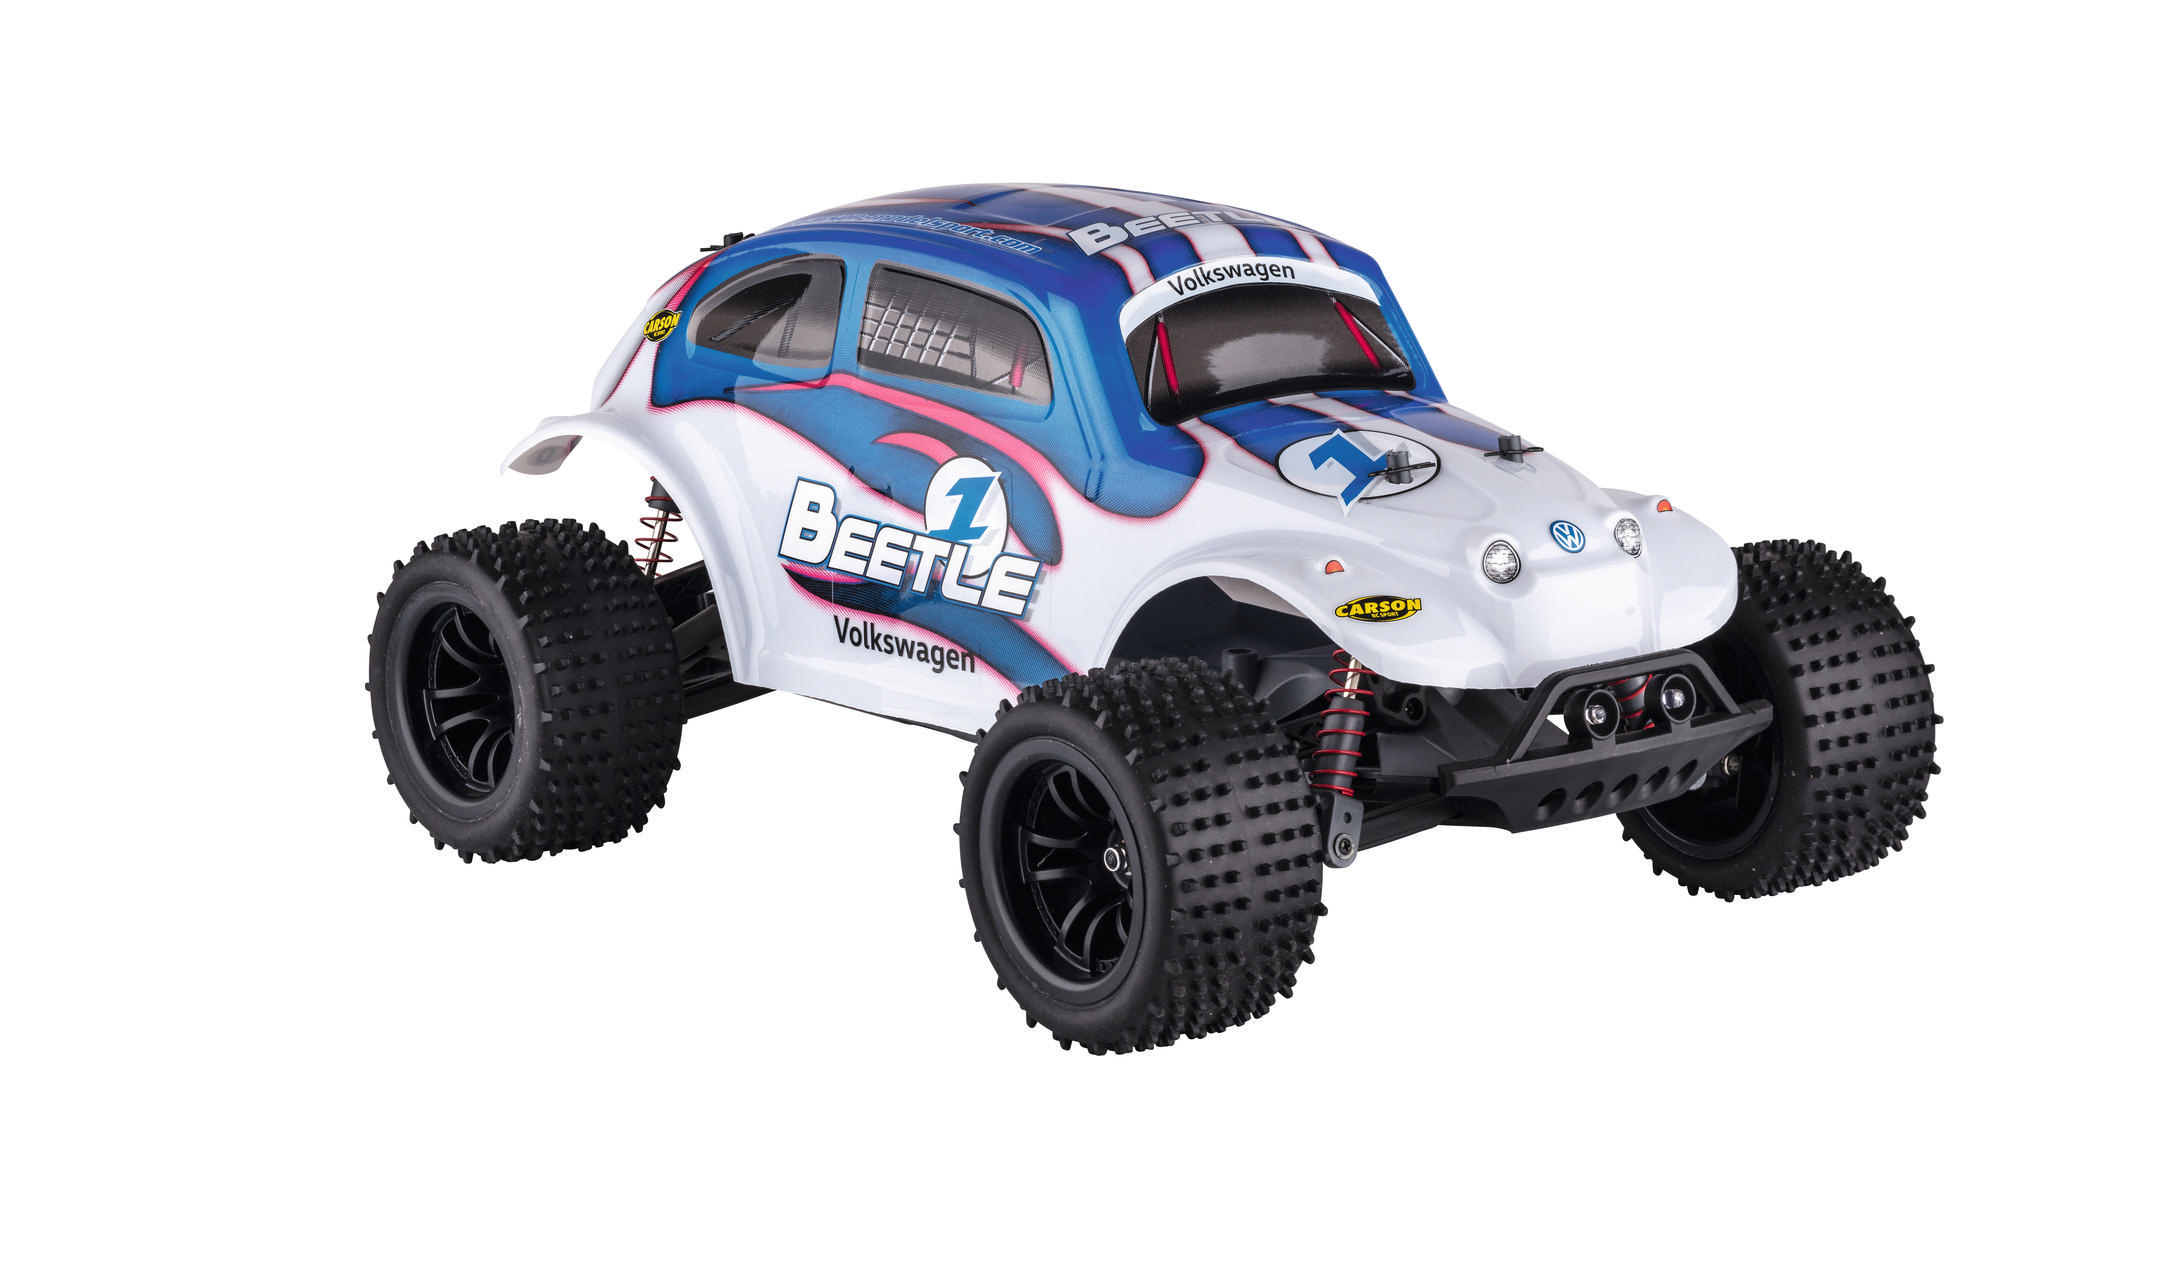 CARSON 1:10 VW Beetle FE RTR Spielzeugmodell, 2.4G Mehrfarbig 100